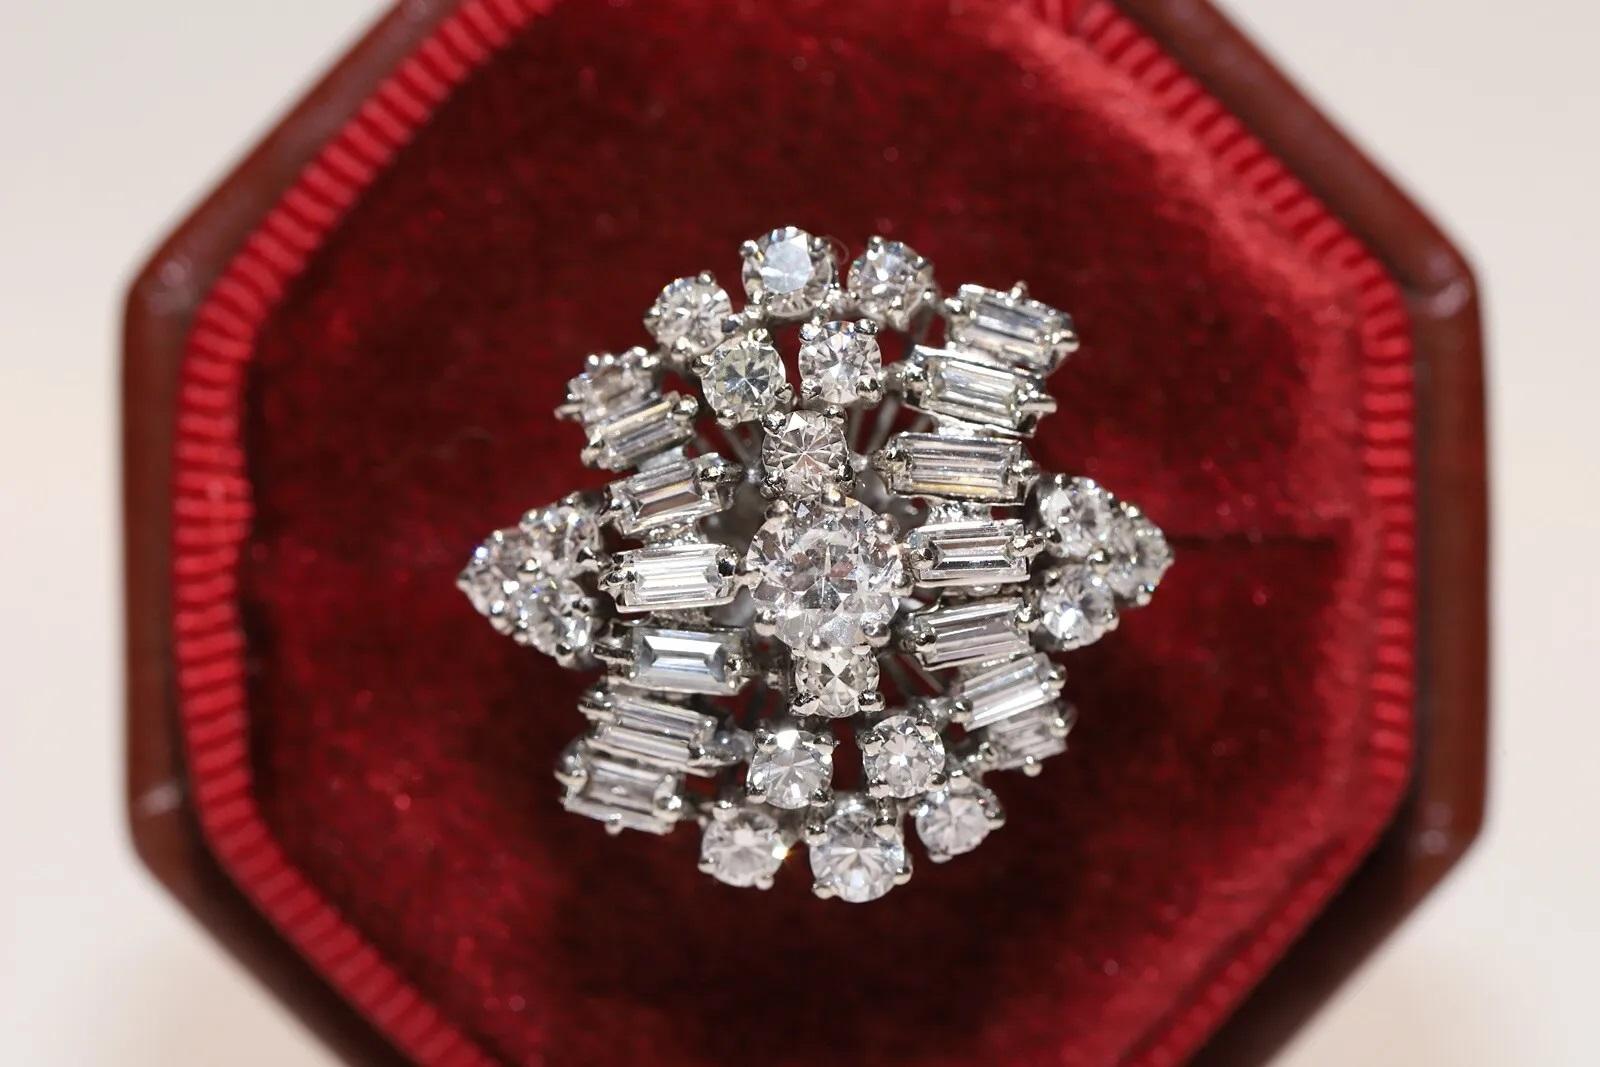 In very good condition.
Total weight is 8.6 grams.
Totally is diamond about 4 carat.
The diamond is has F-G-H color and vvs-vs clarity.
Ring size is US 6.5 (We offer free resizing)
We can make any size.
Acid tested to be 18k real gold.
Please